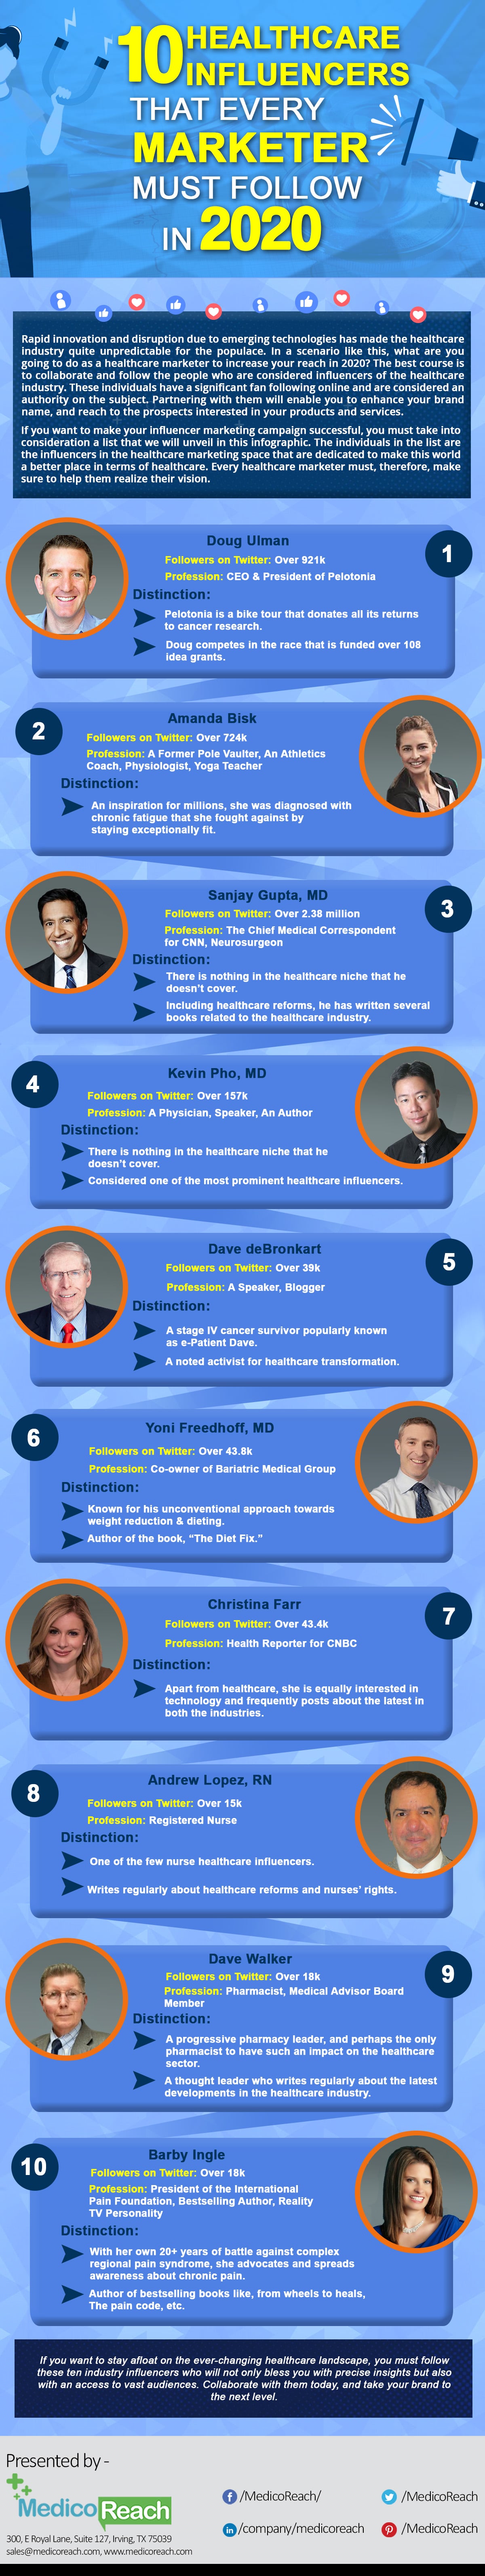 Healthcare influencers that every marketer should follow by medicoreach